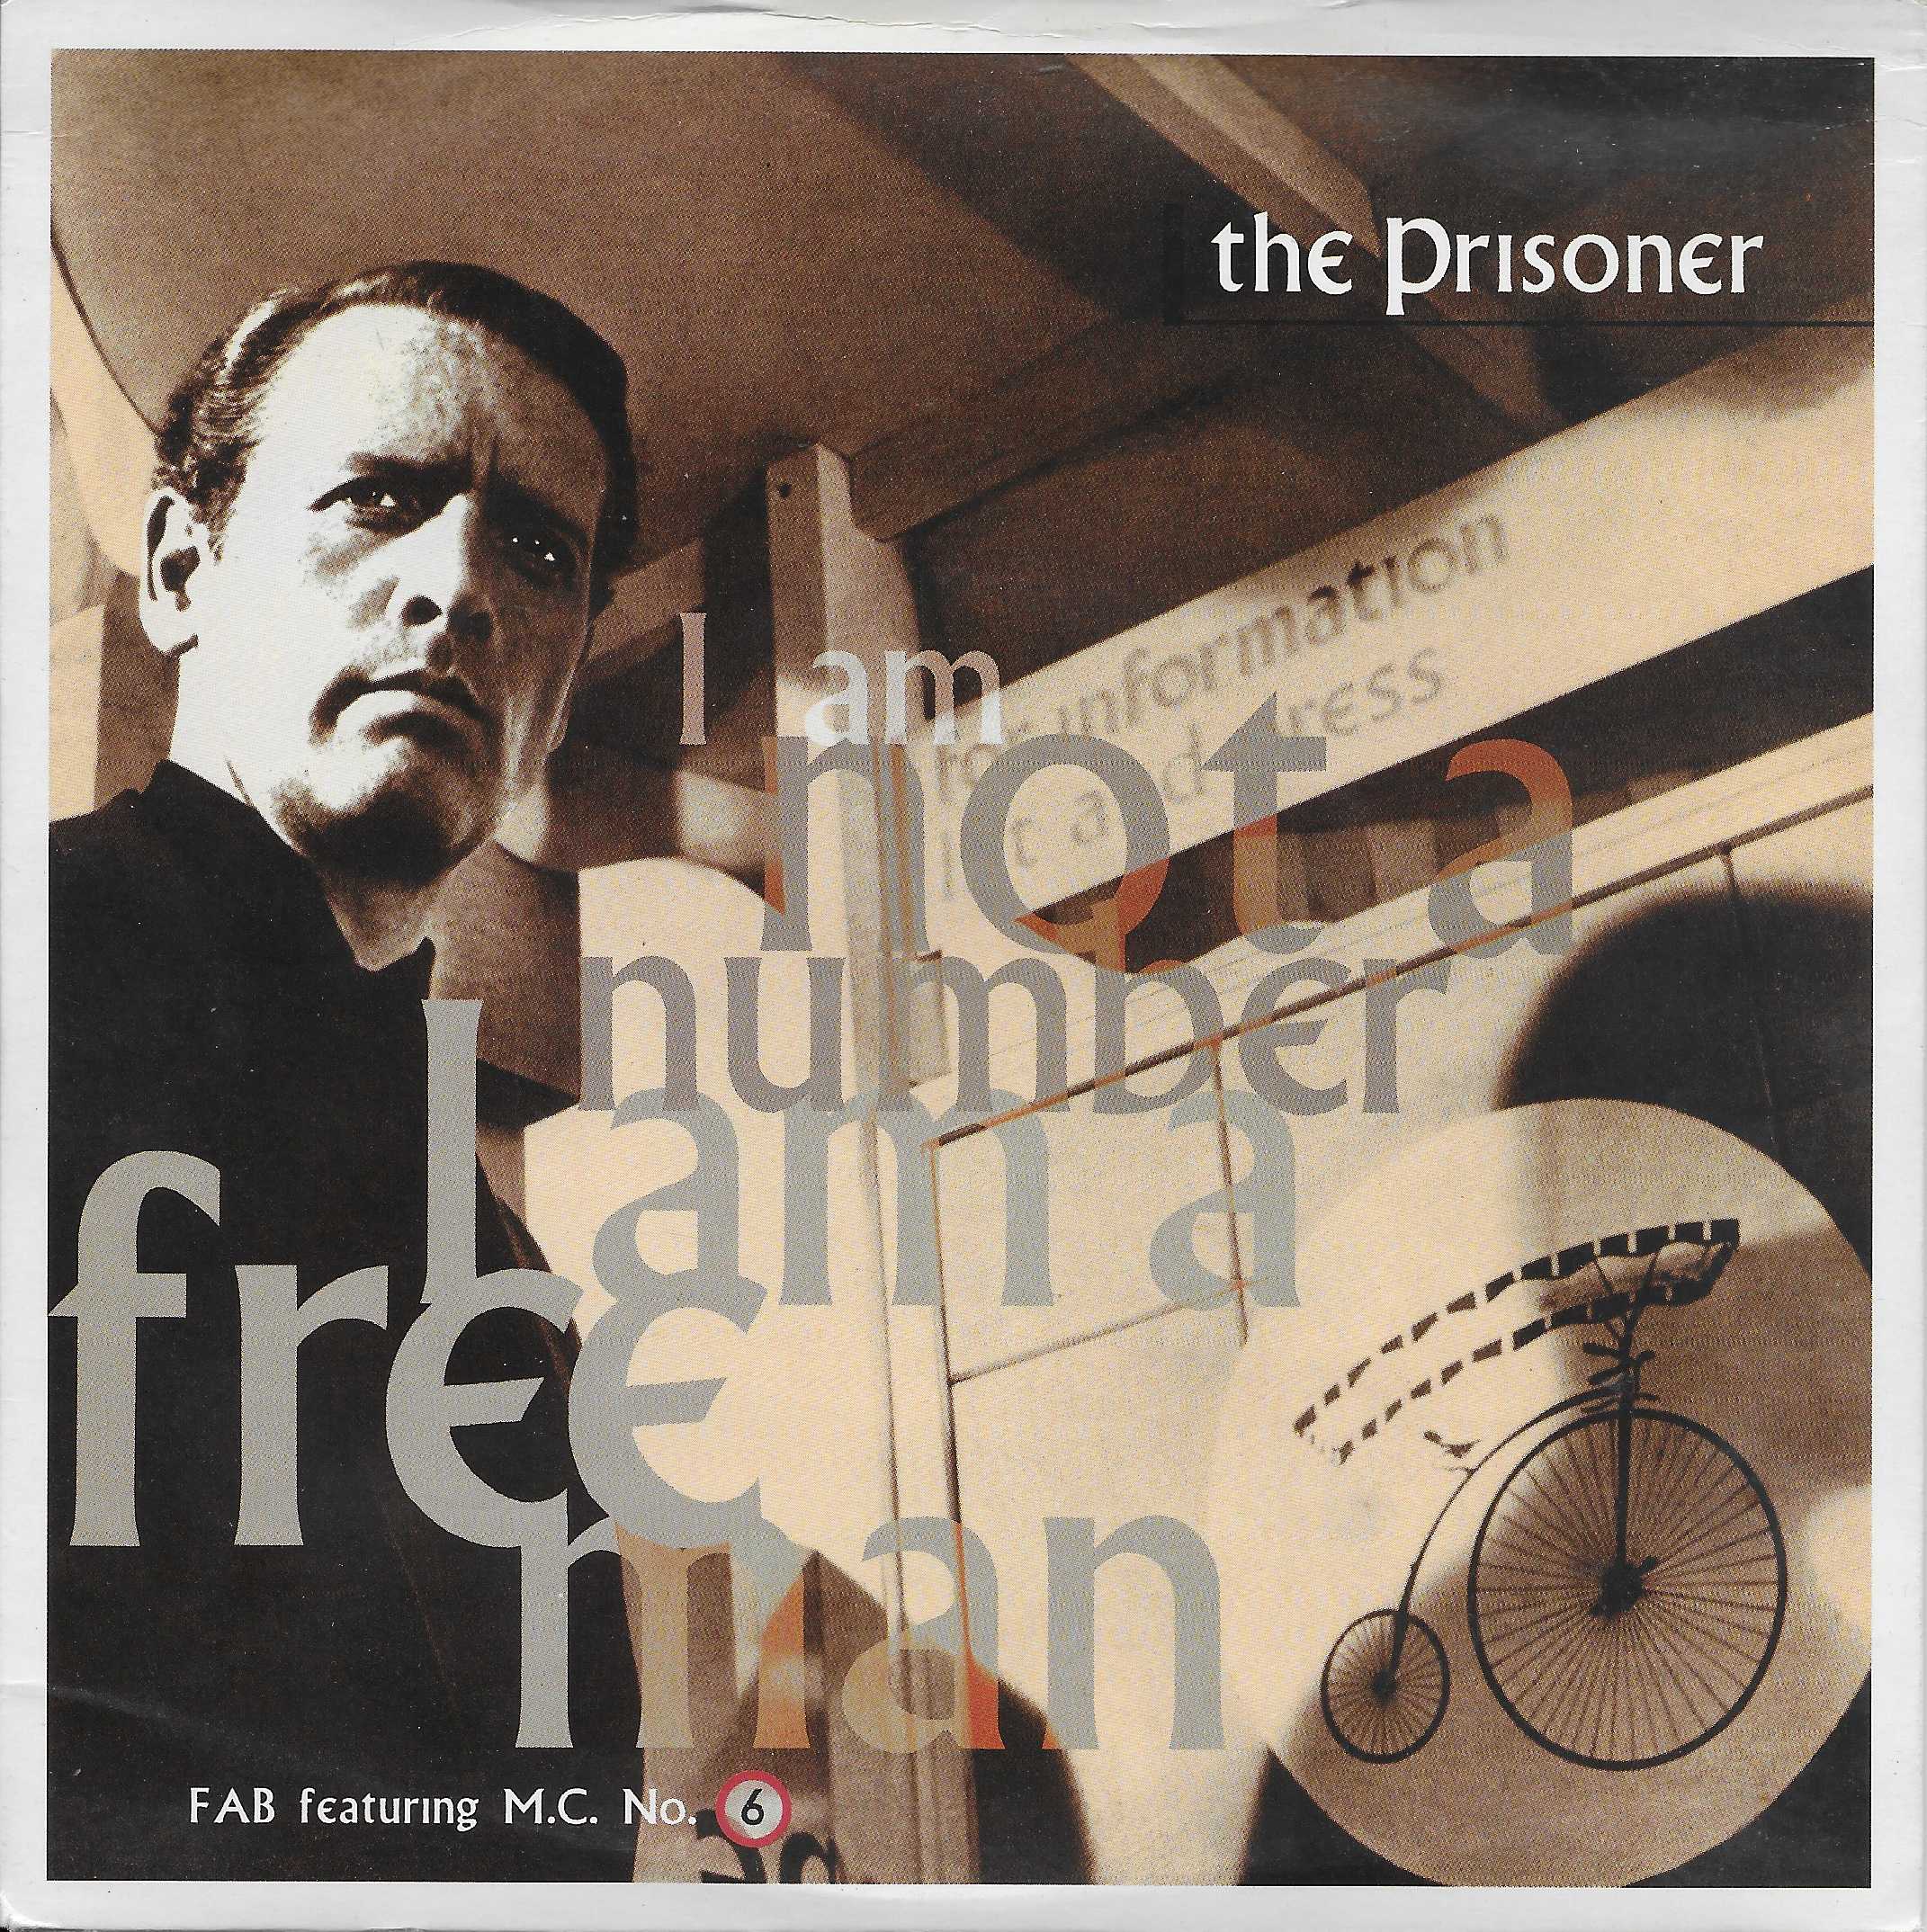 Picture of FAB 6 The prisoner (Free man mix) by artist Ron Grainer / F. A. B. from ITV, Channel 4 and Channel 5 library